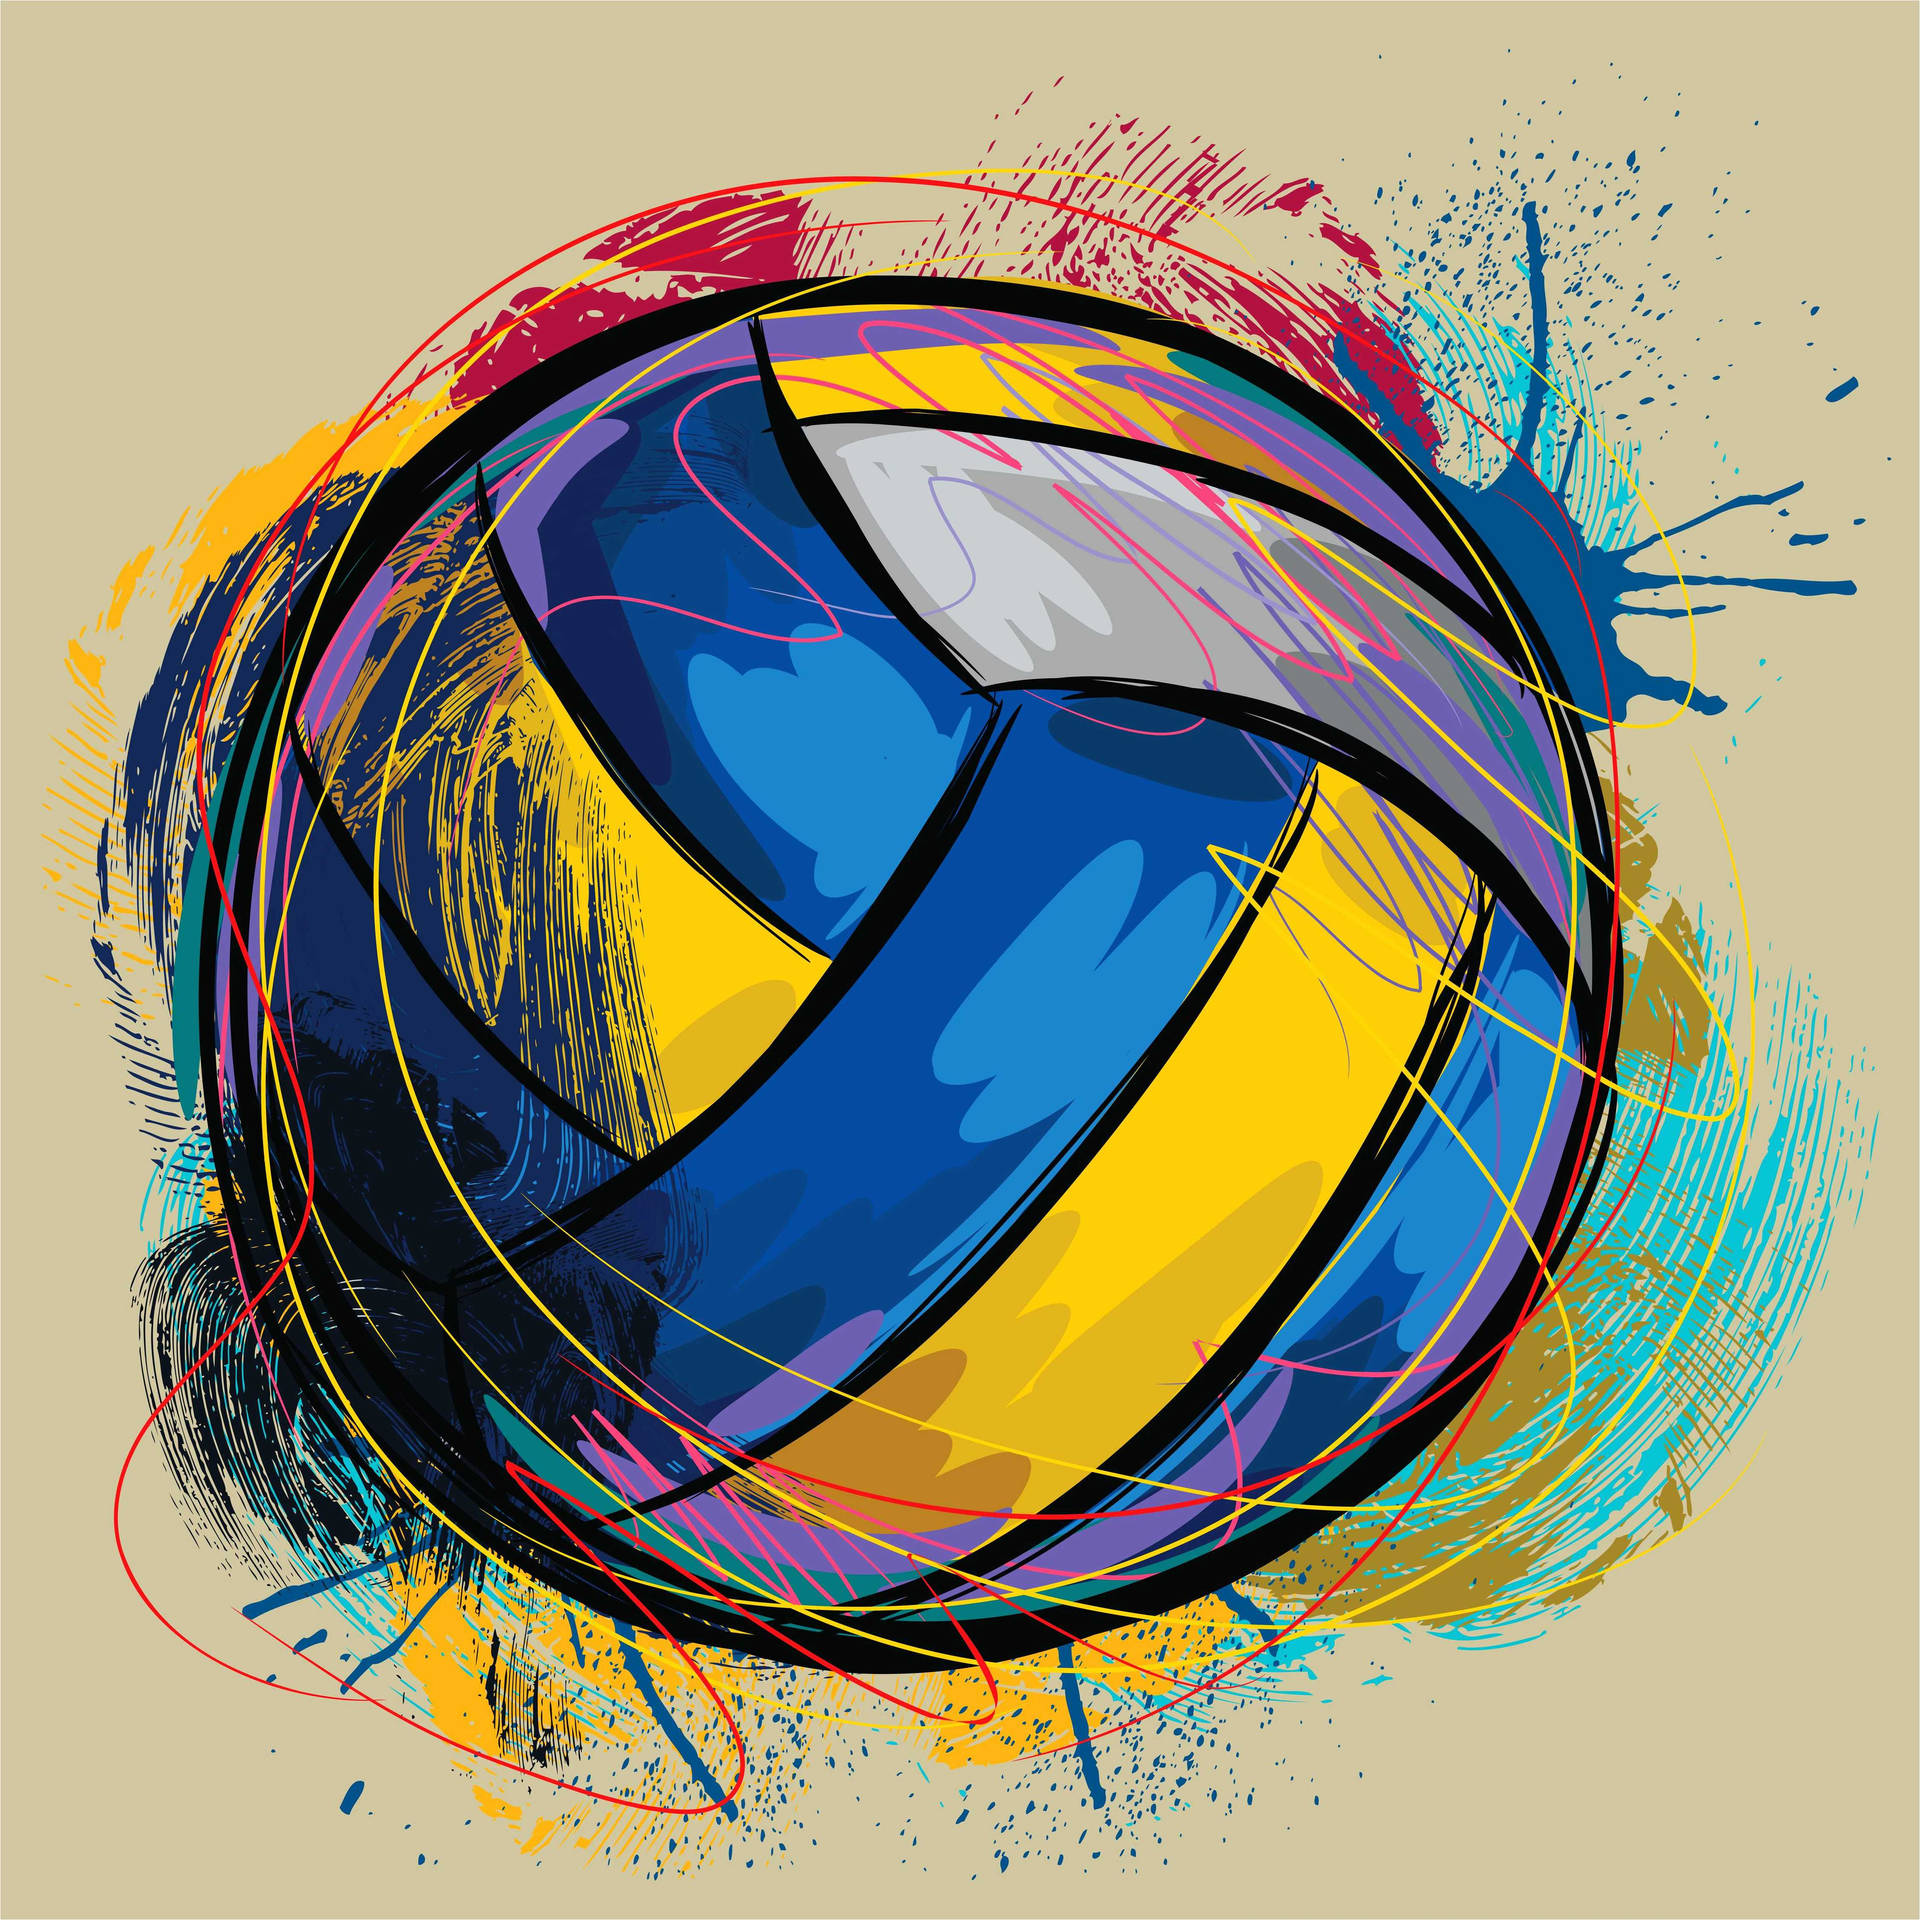 Volleyball Aesthetic Colorful Digital Art Wallpaper